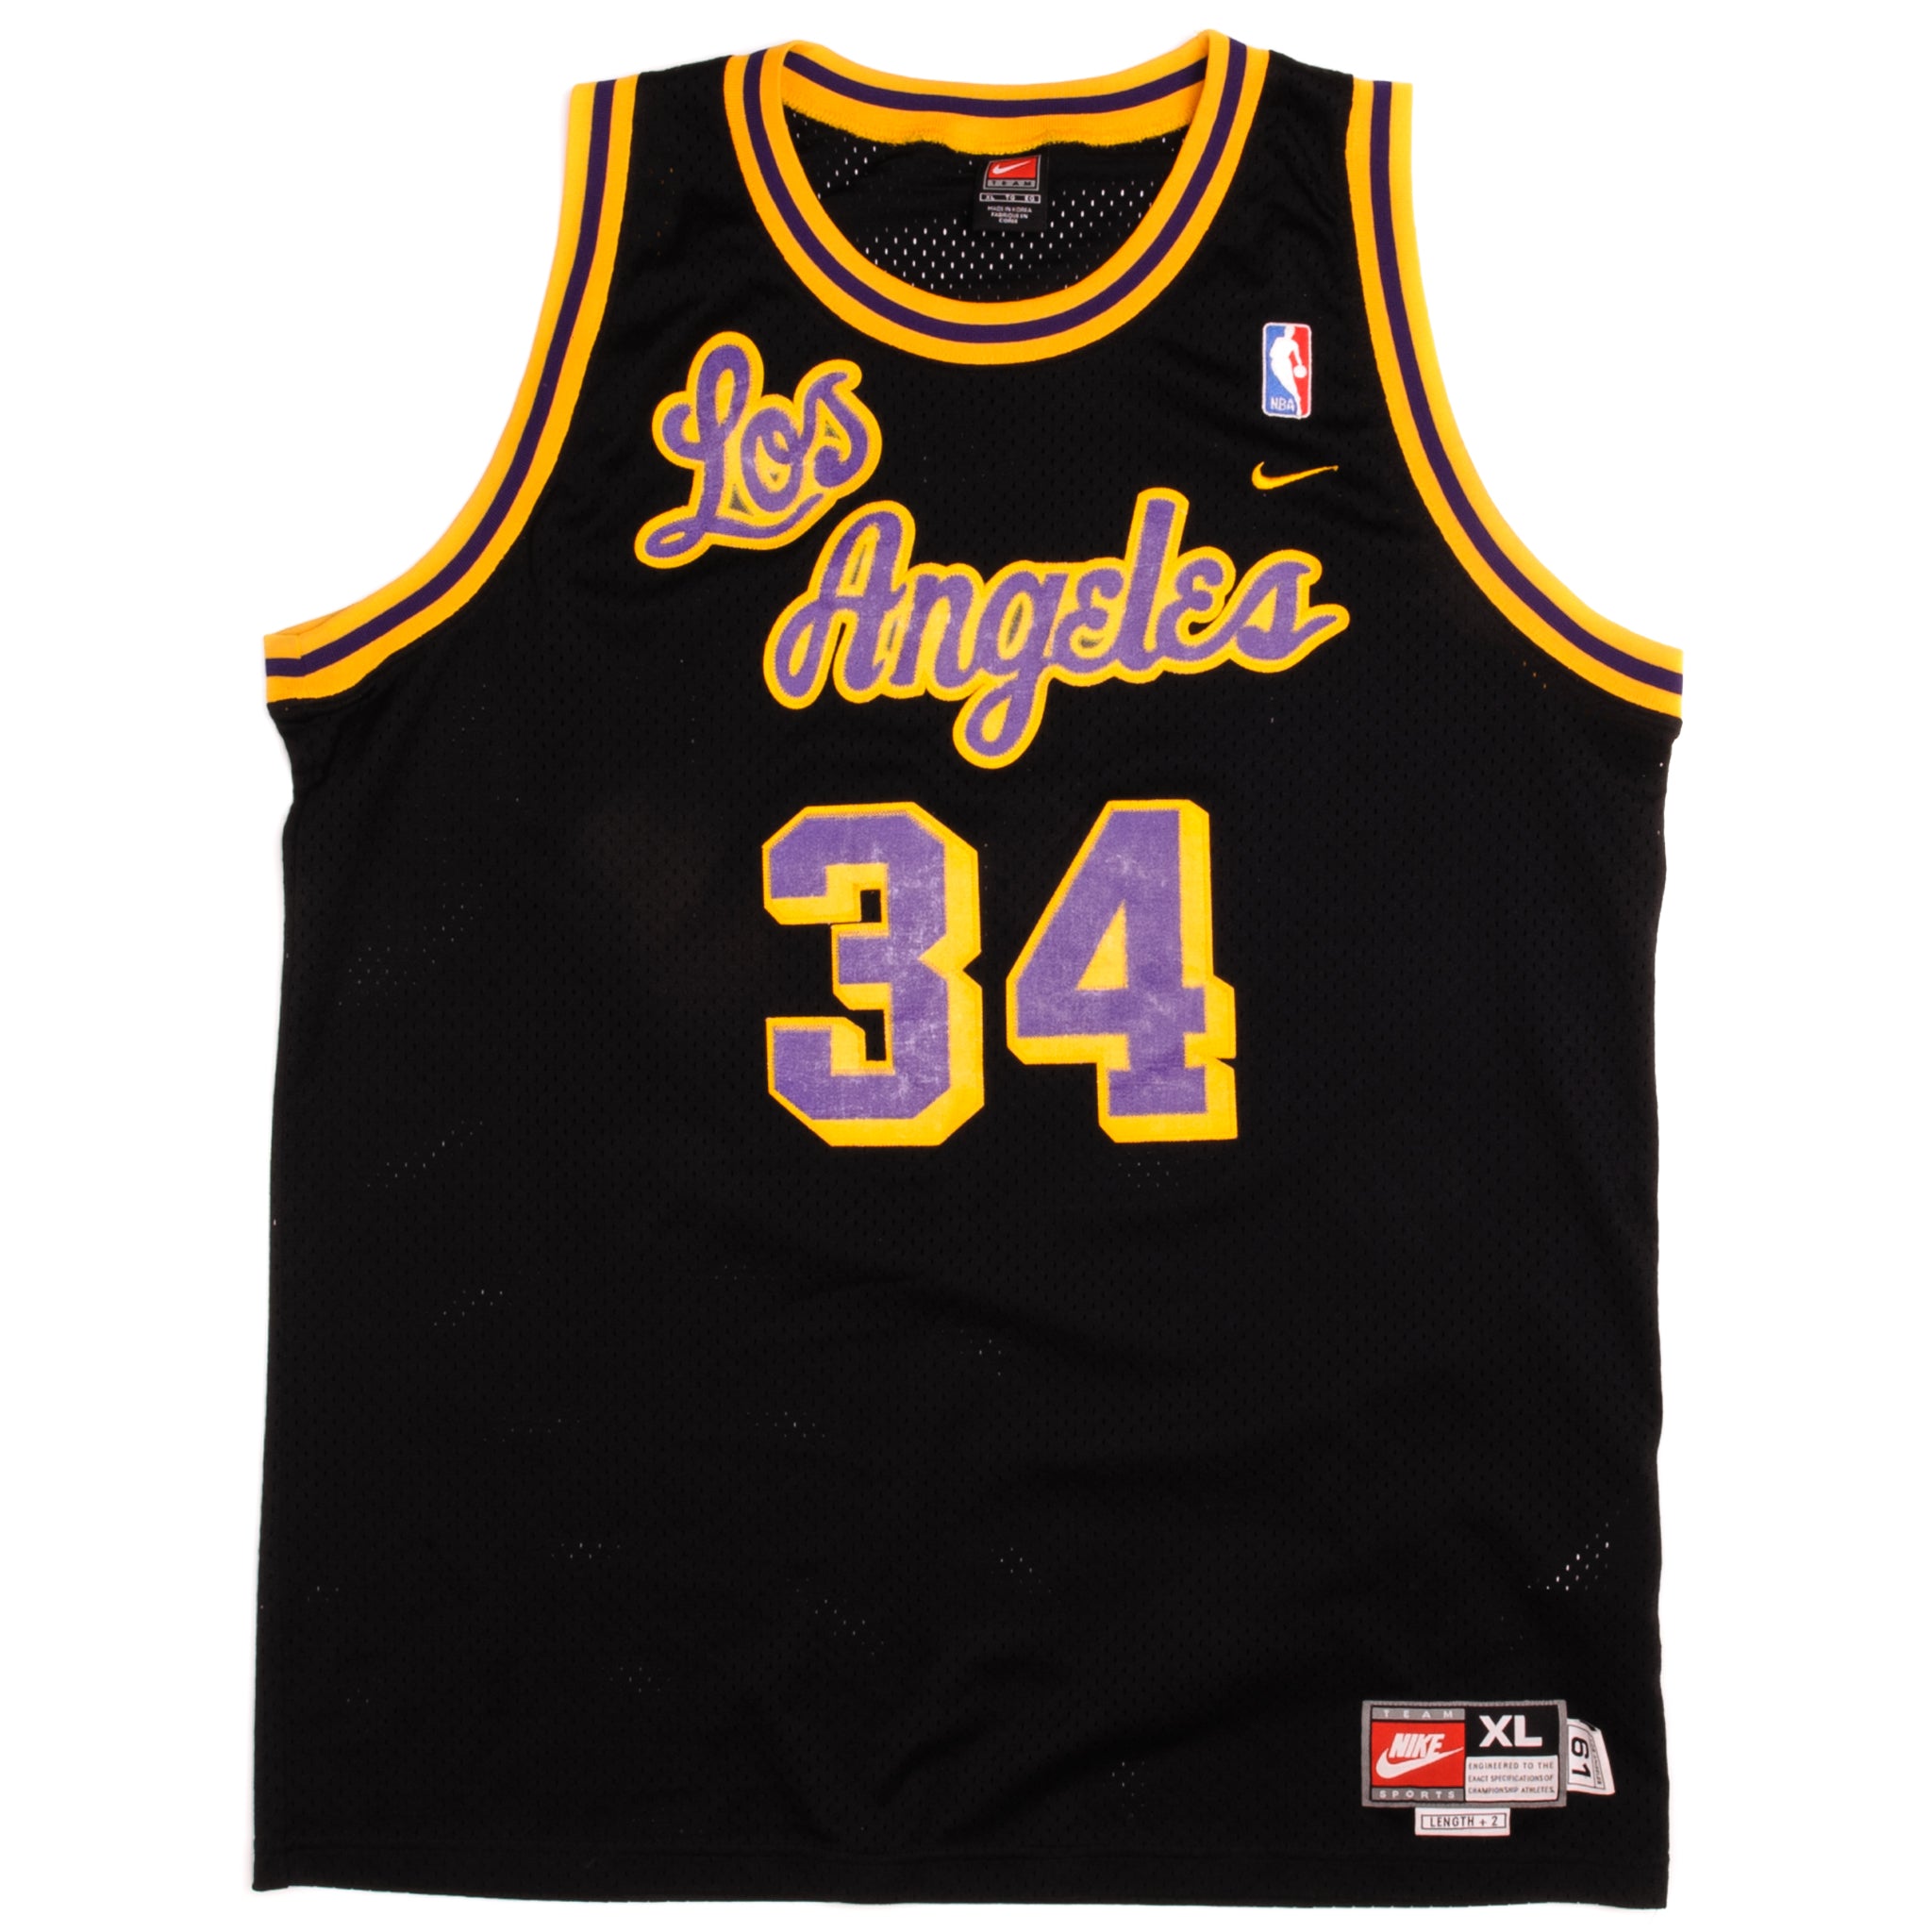 Los Angeles Lakers Throwback Jersey, Lakers Collection, Lakers